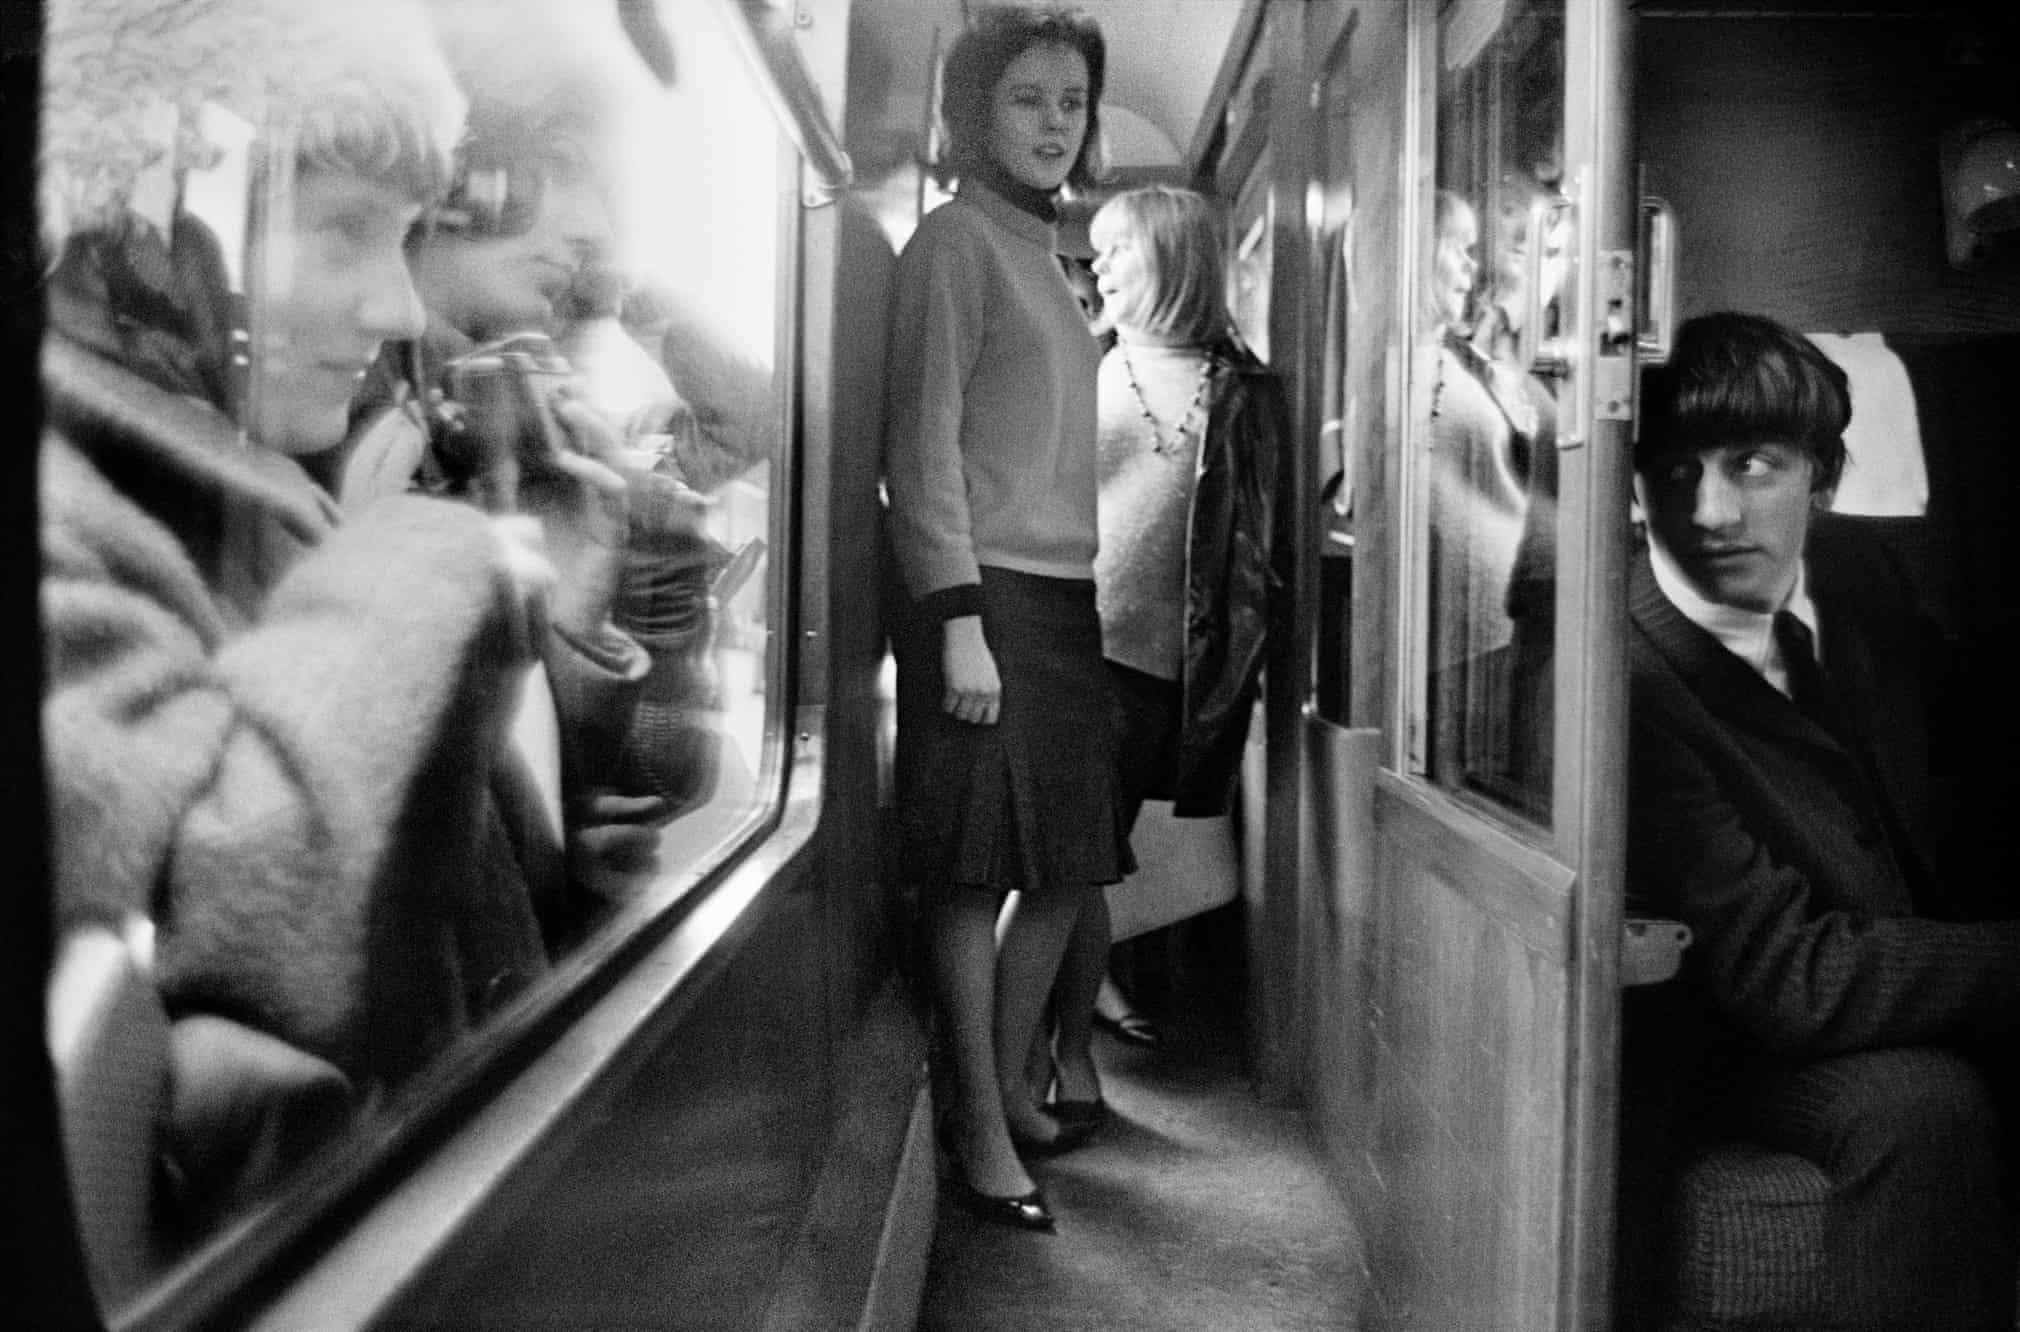 Ringo Starr on the train during the filming of A Hard Day’s Night, UK, David Hurn, 1964.jpeg